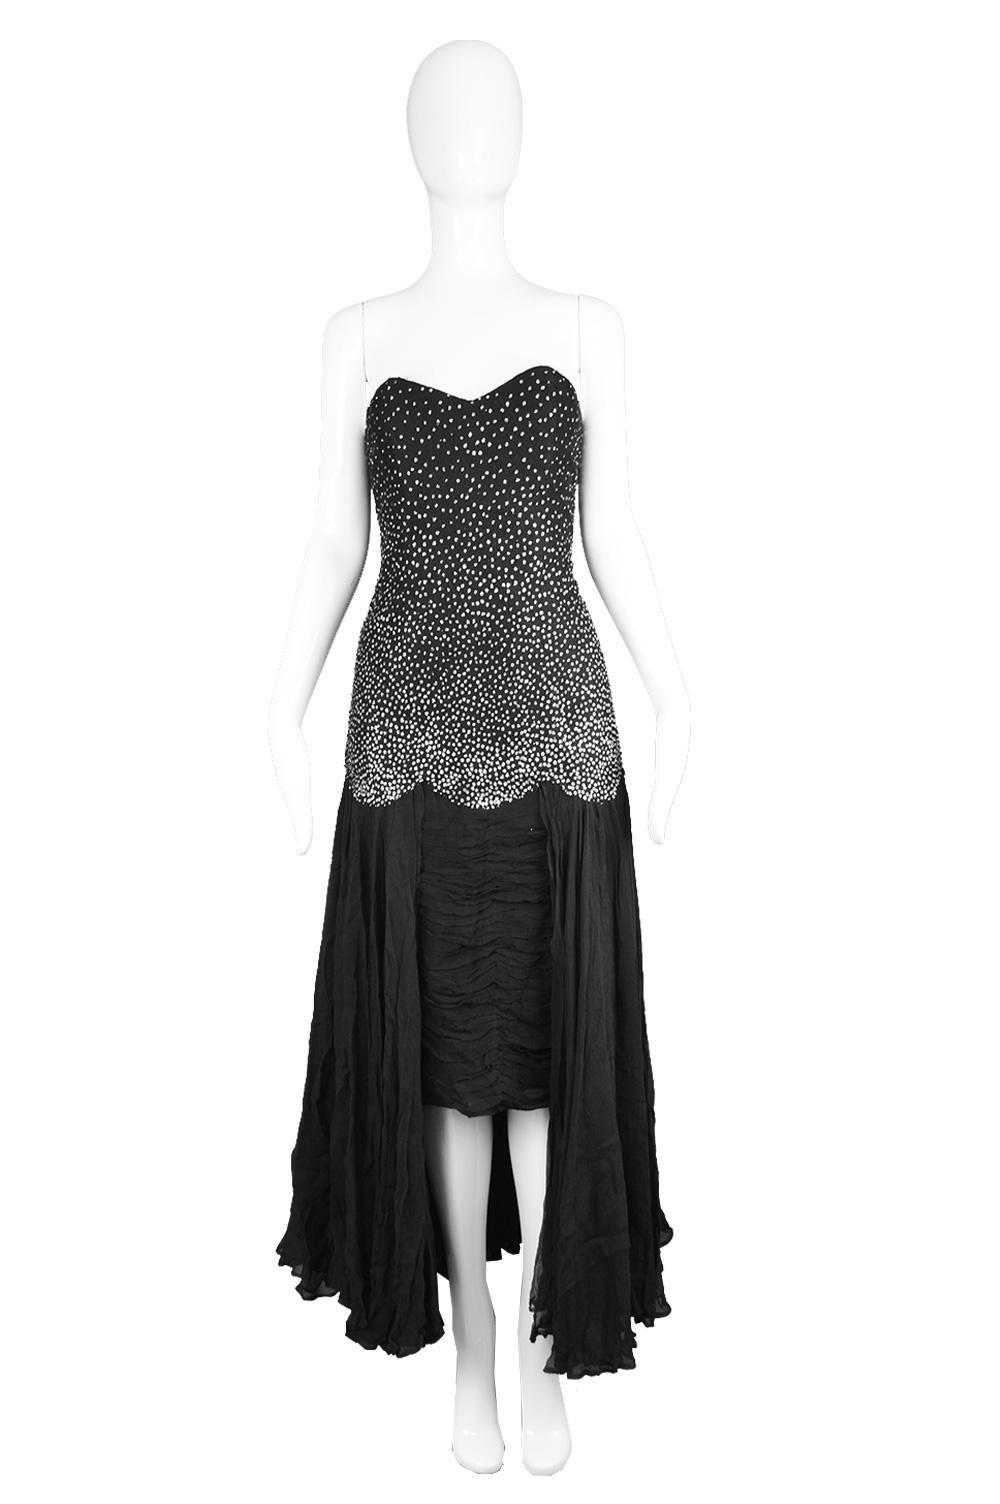 Nina Ricci Vintage Black Silk Chiffon & Silver Glitter Strapless Dress, 1980s

A breathtaking vintage women's evening gown from c. the late 80s by luxury French fashion house, Nina Ricci Paris. In a Black lace / tulle with a silver glitter effect